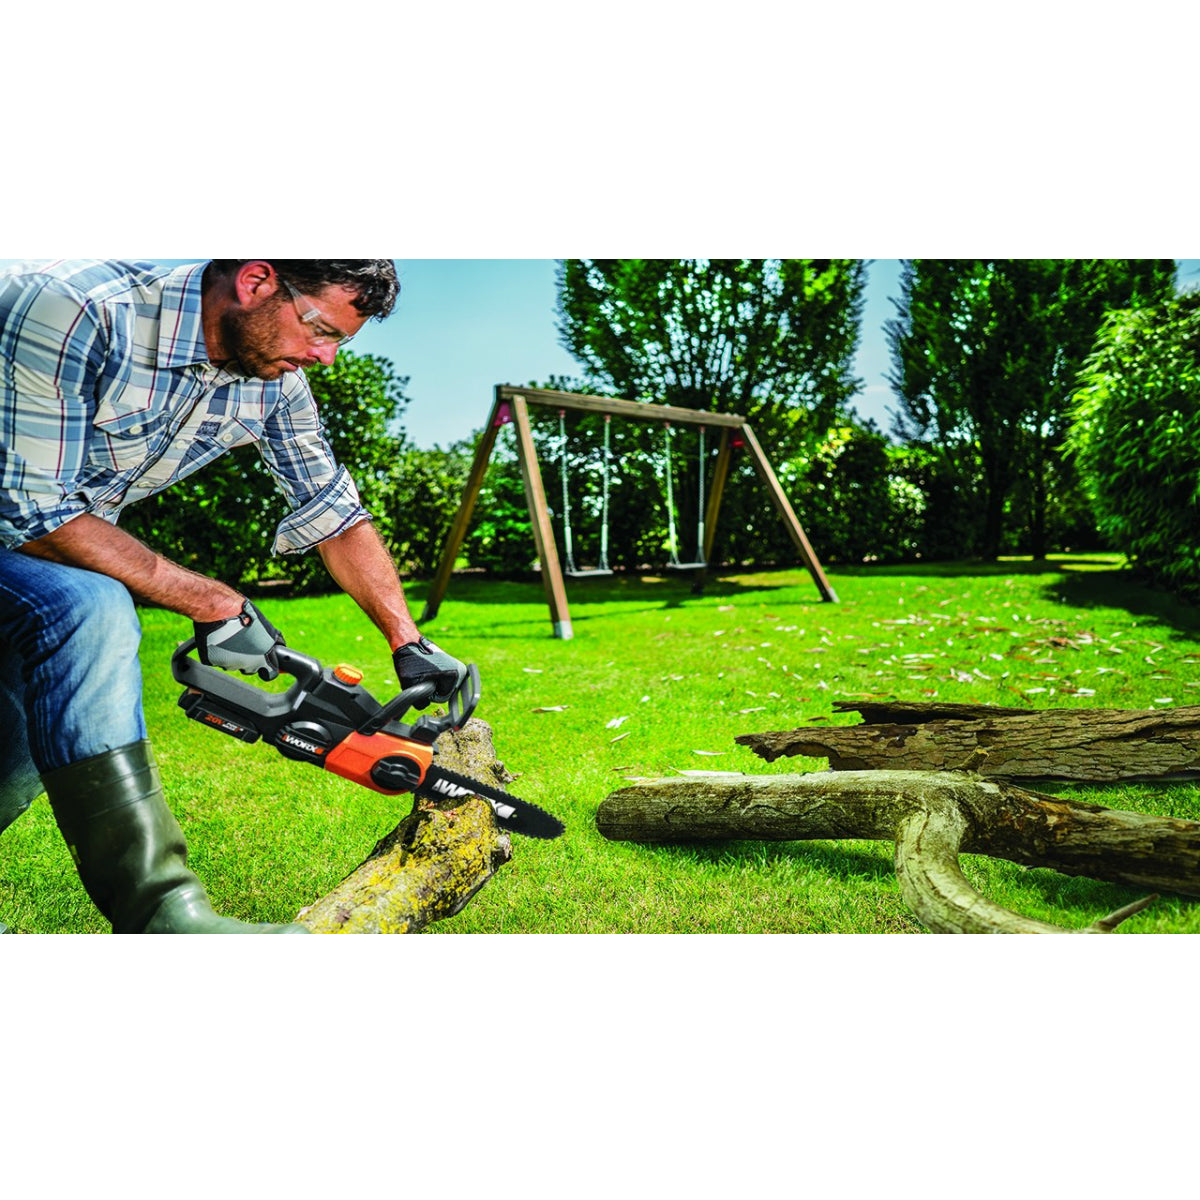 Worx WG322 Cordless Chainsaw with Auto-Tension, 10, 20V – Toolbox